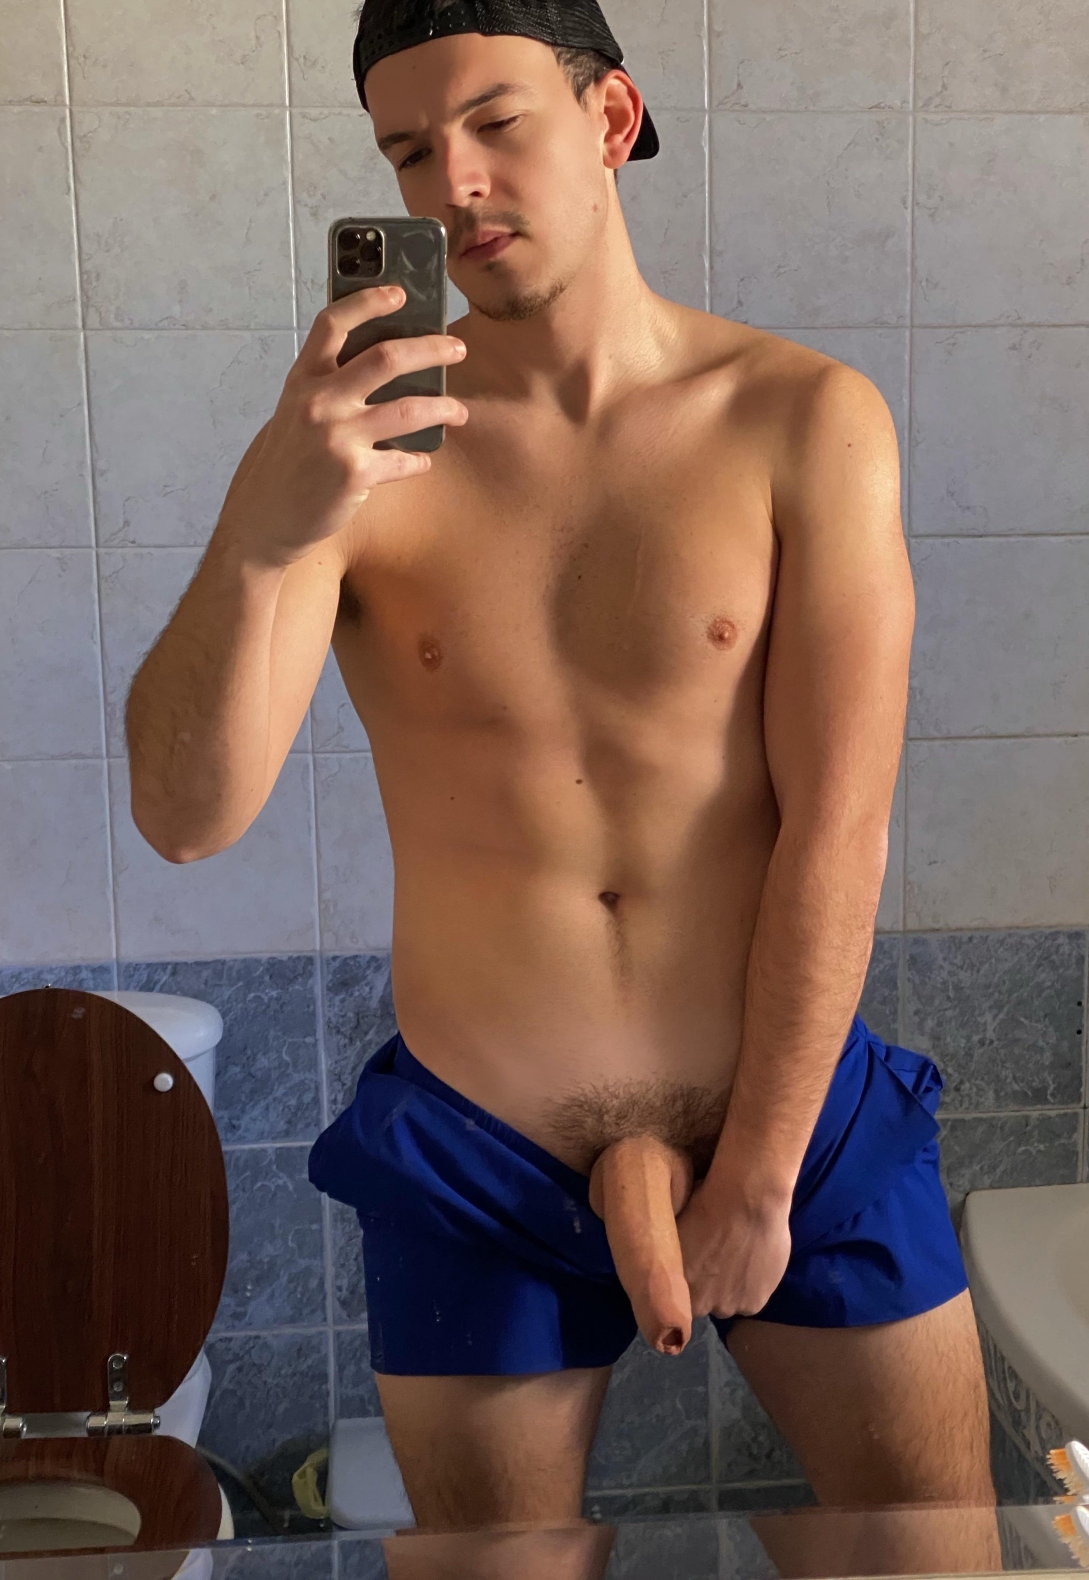 Hot boy with his cock out